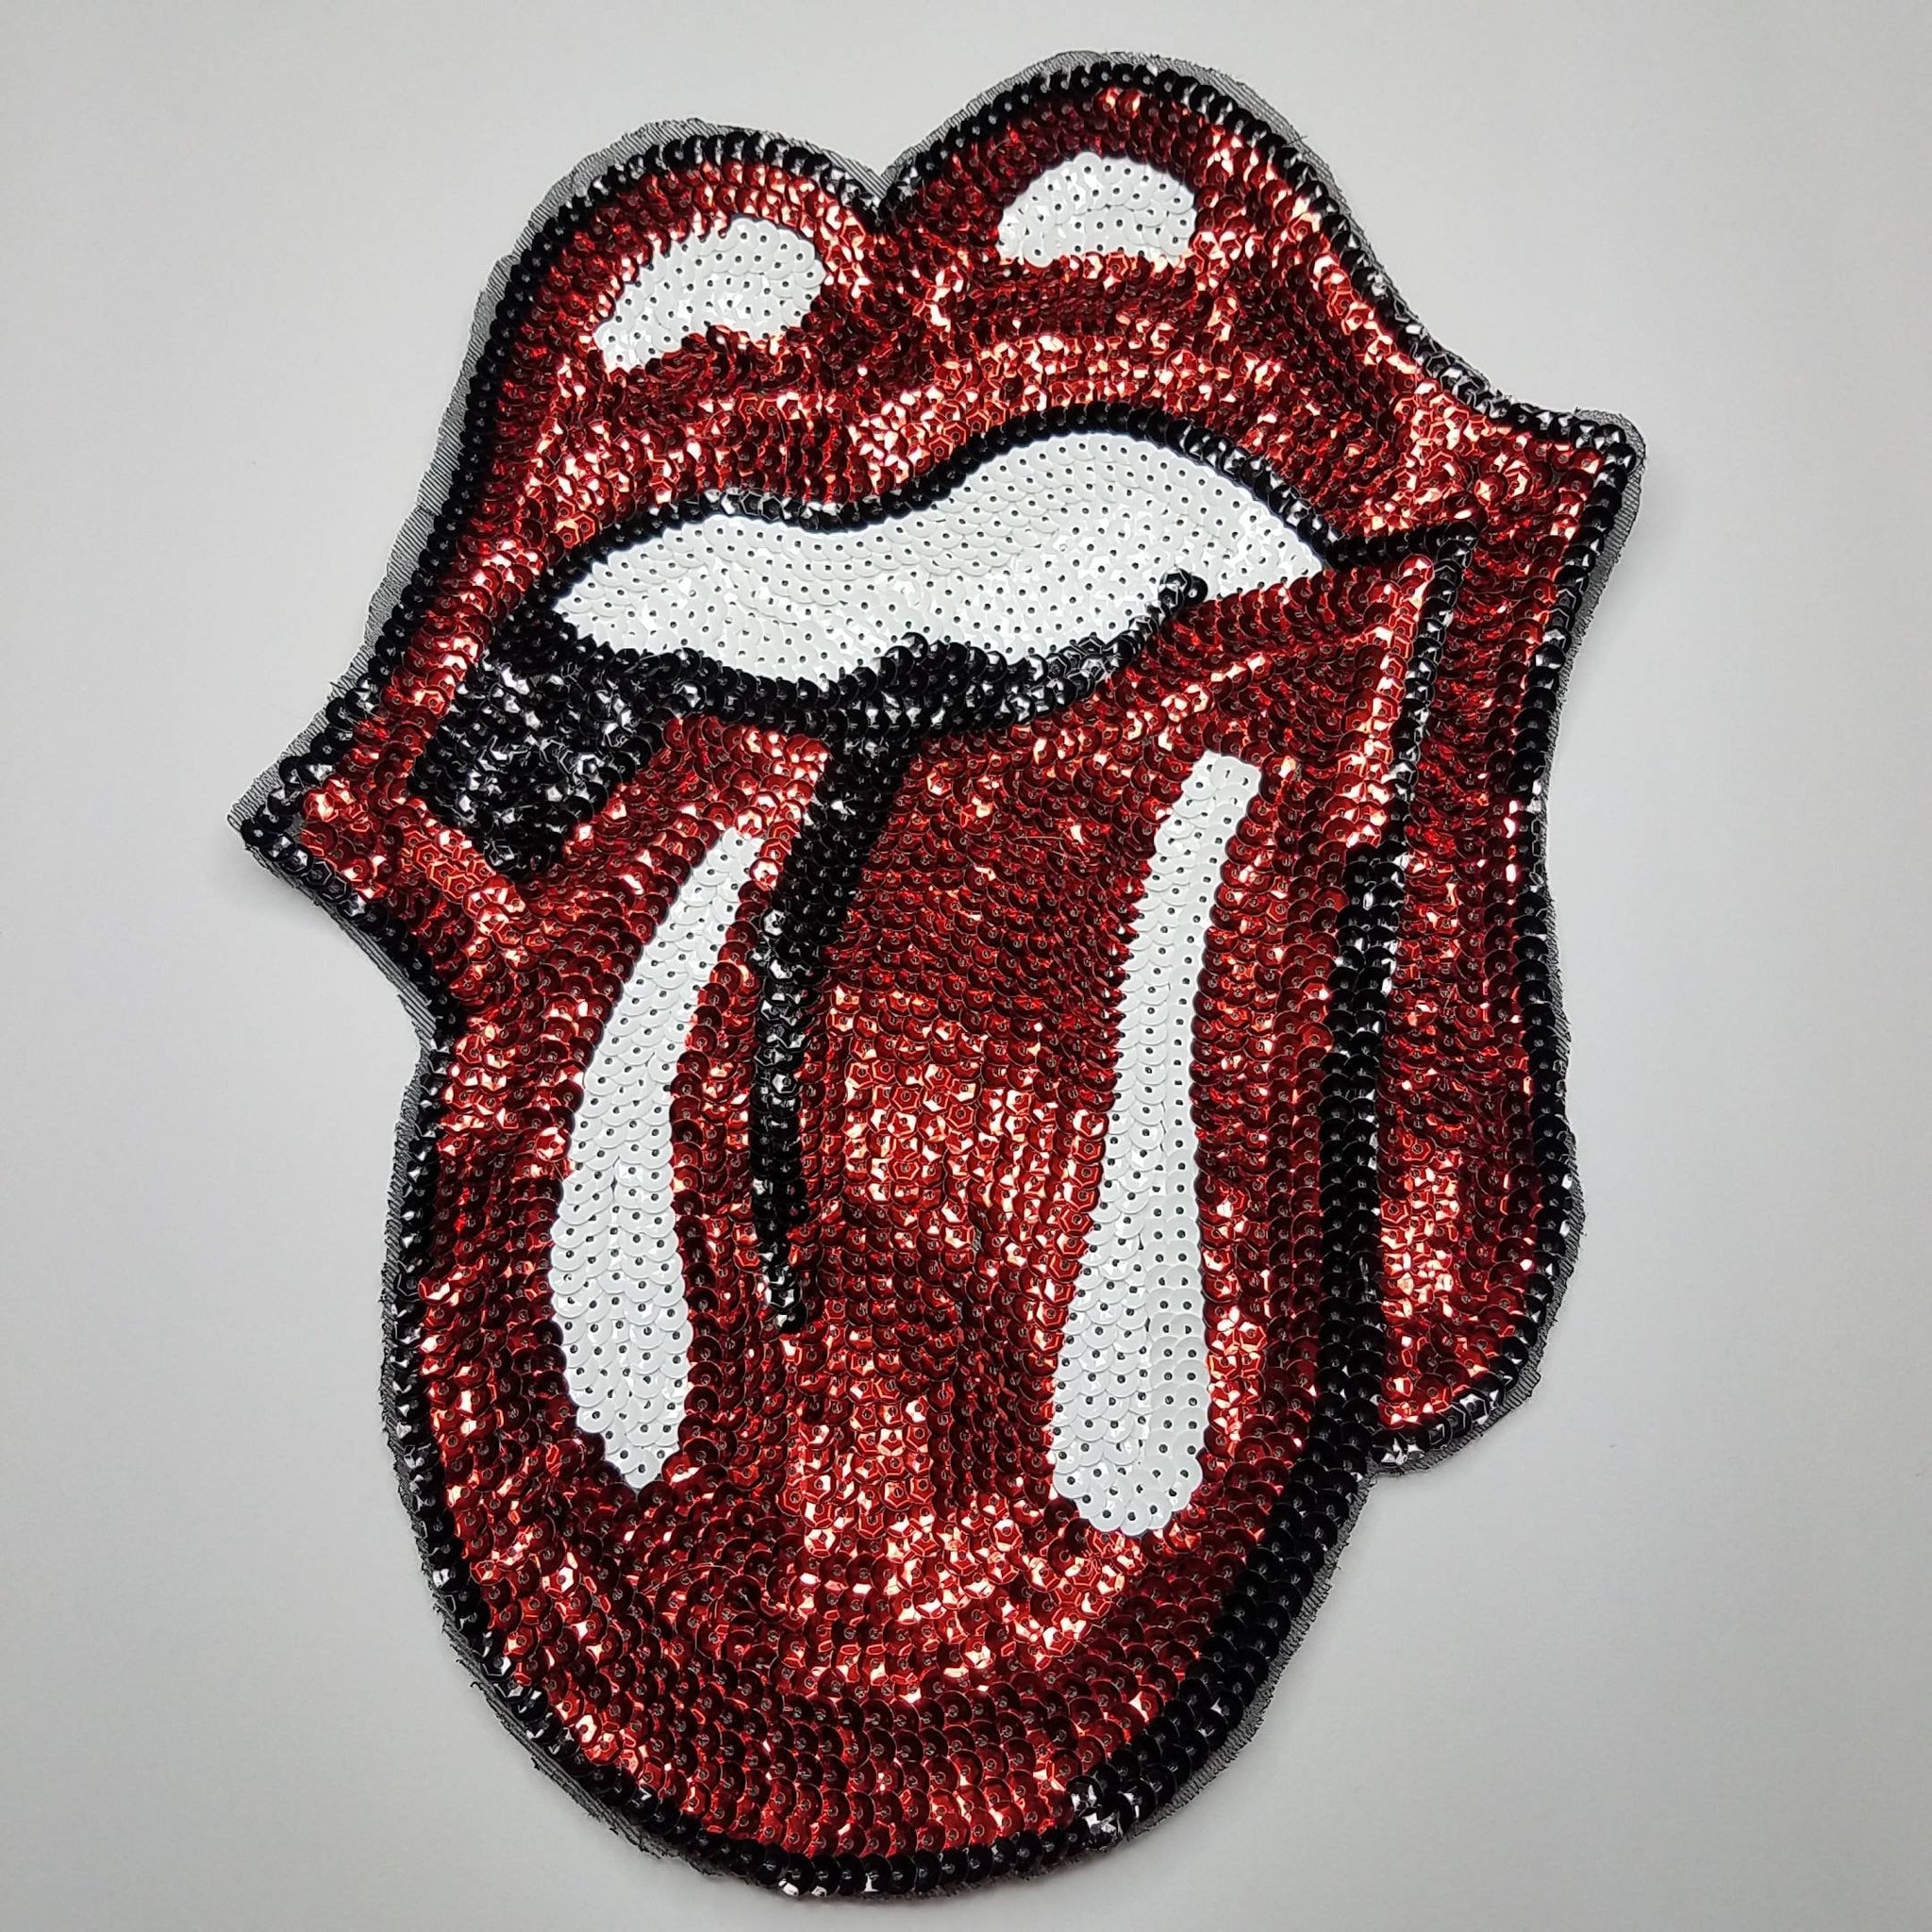 Sequins Red KISS Lips and Tongue Patch (sew-on) Size 13", LARGE Bling Patch for Denim Jacket, Shirts, Hoodies, and More